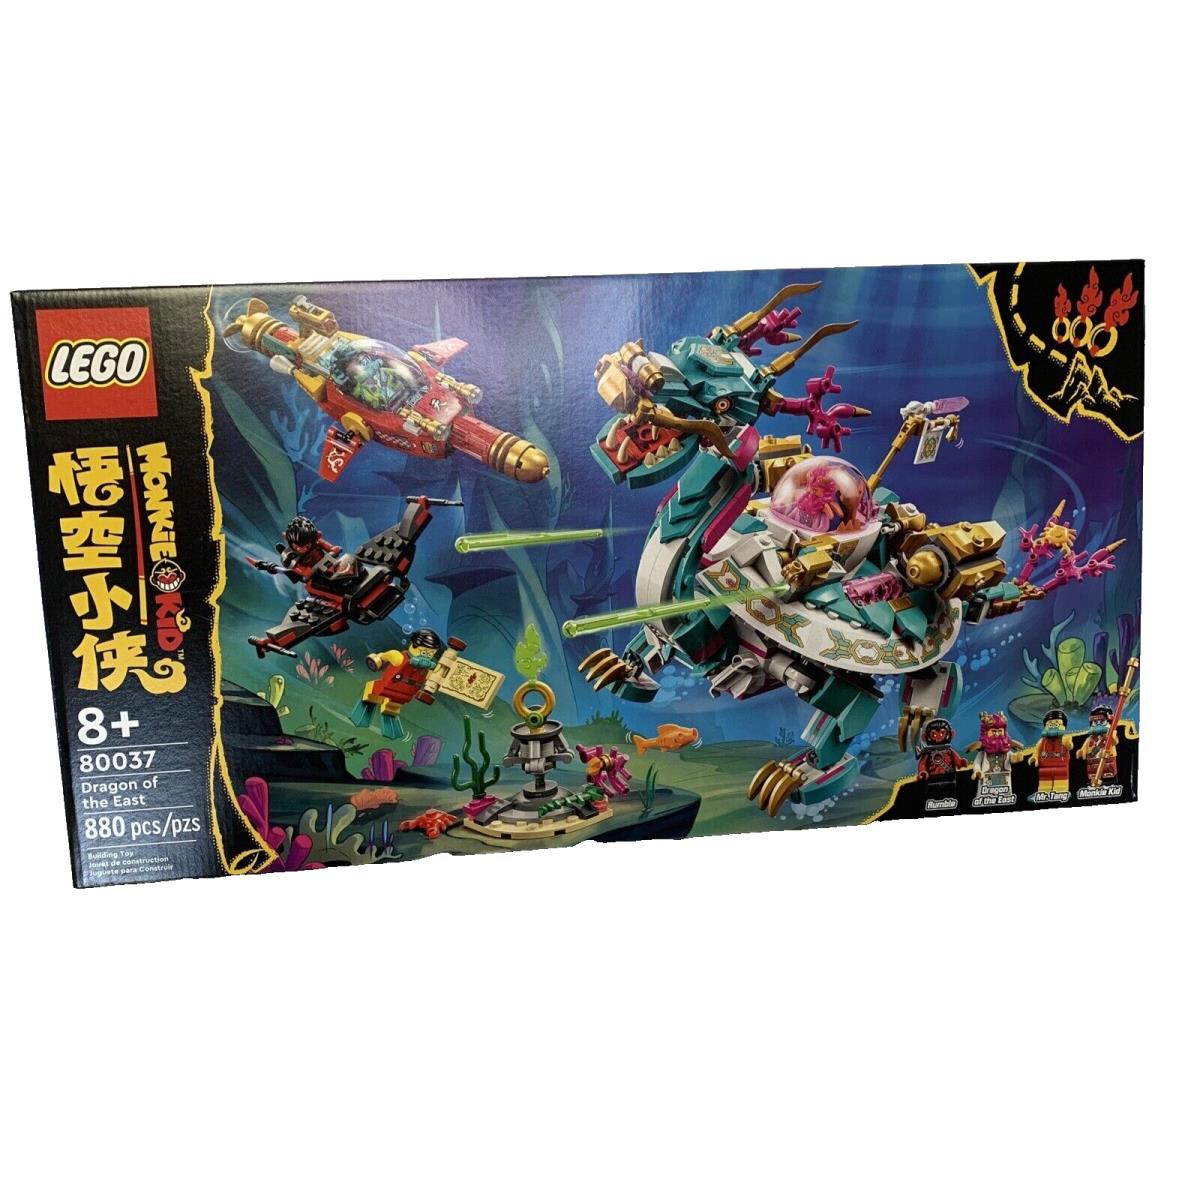 Lego Monkie Kid Dragon of The East 80037 Ready To Ship From US